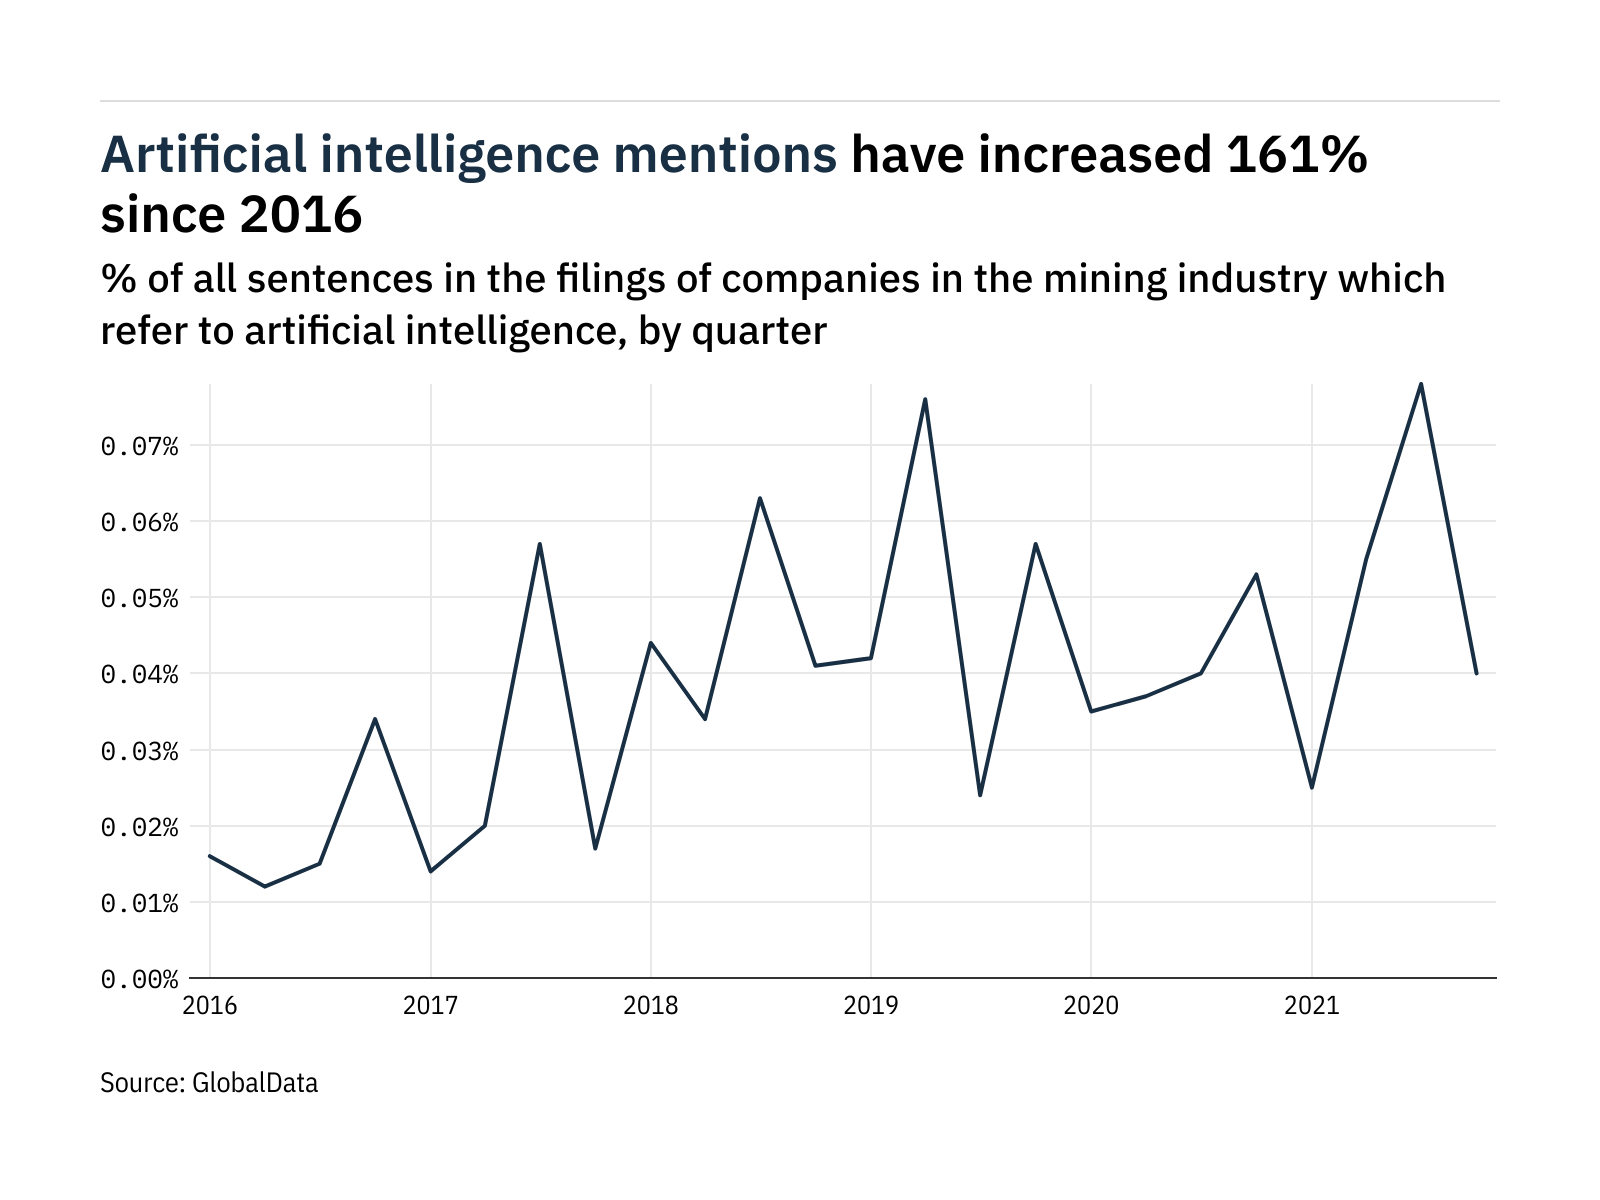 Filings buzz in the mining industry: 49% decrease in artificial intelligence mentions in Q4 of 2021